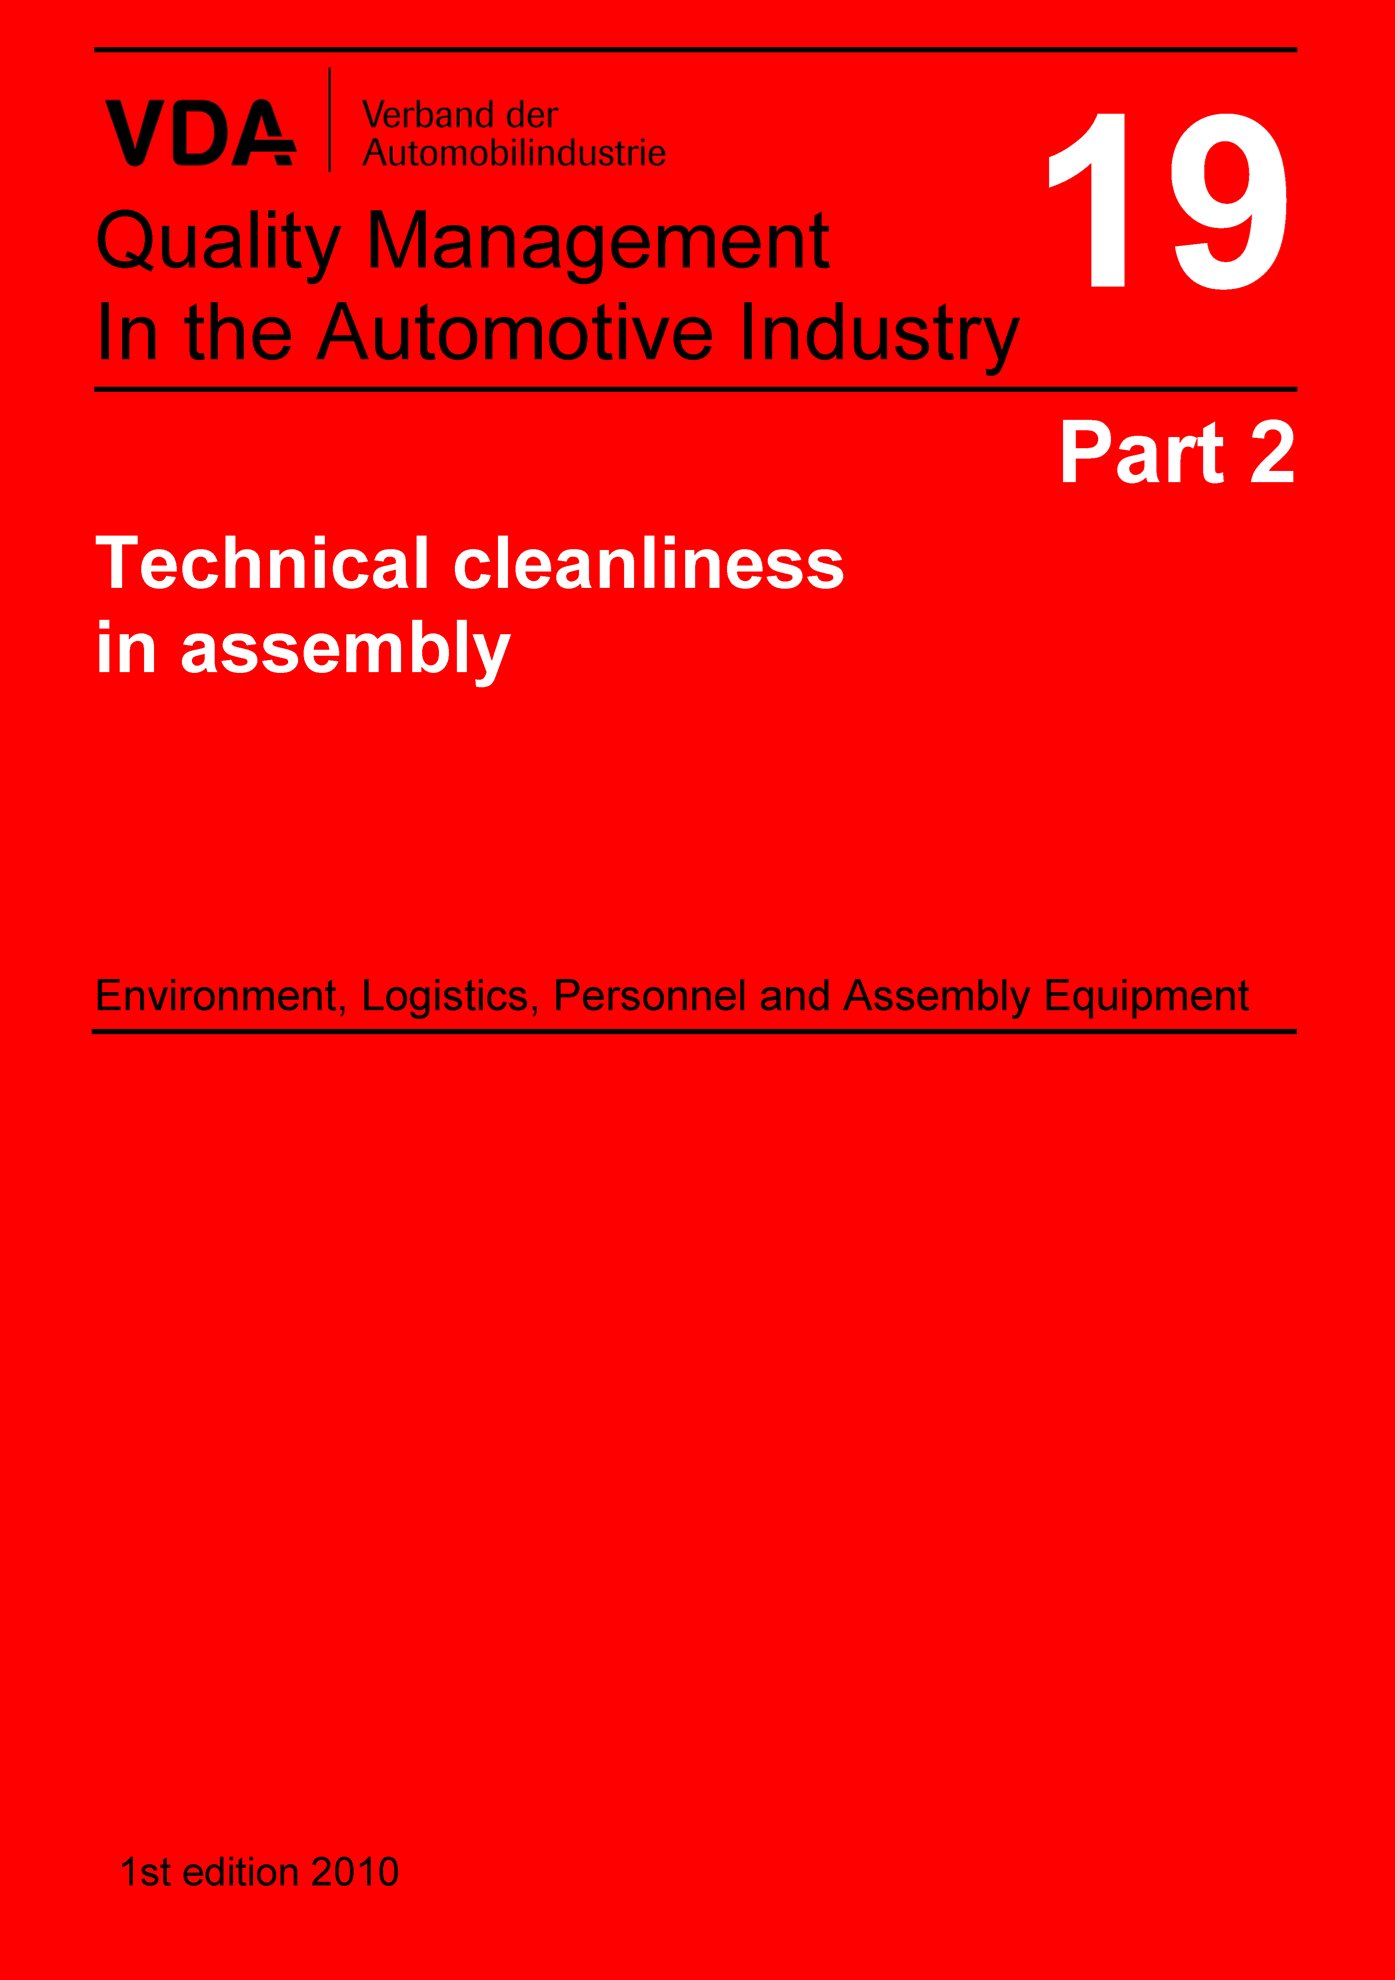 Publikace  VDA Volume 19 Part 2, Technical cleanliness in assembly - Environment, Logistics, Personnel and Assembly Equipment - 1st edition 2010 1.1.2010 náhled